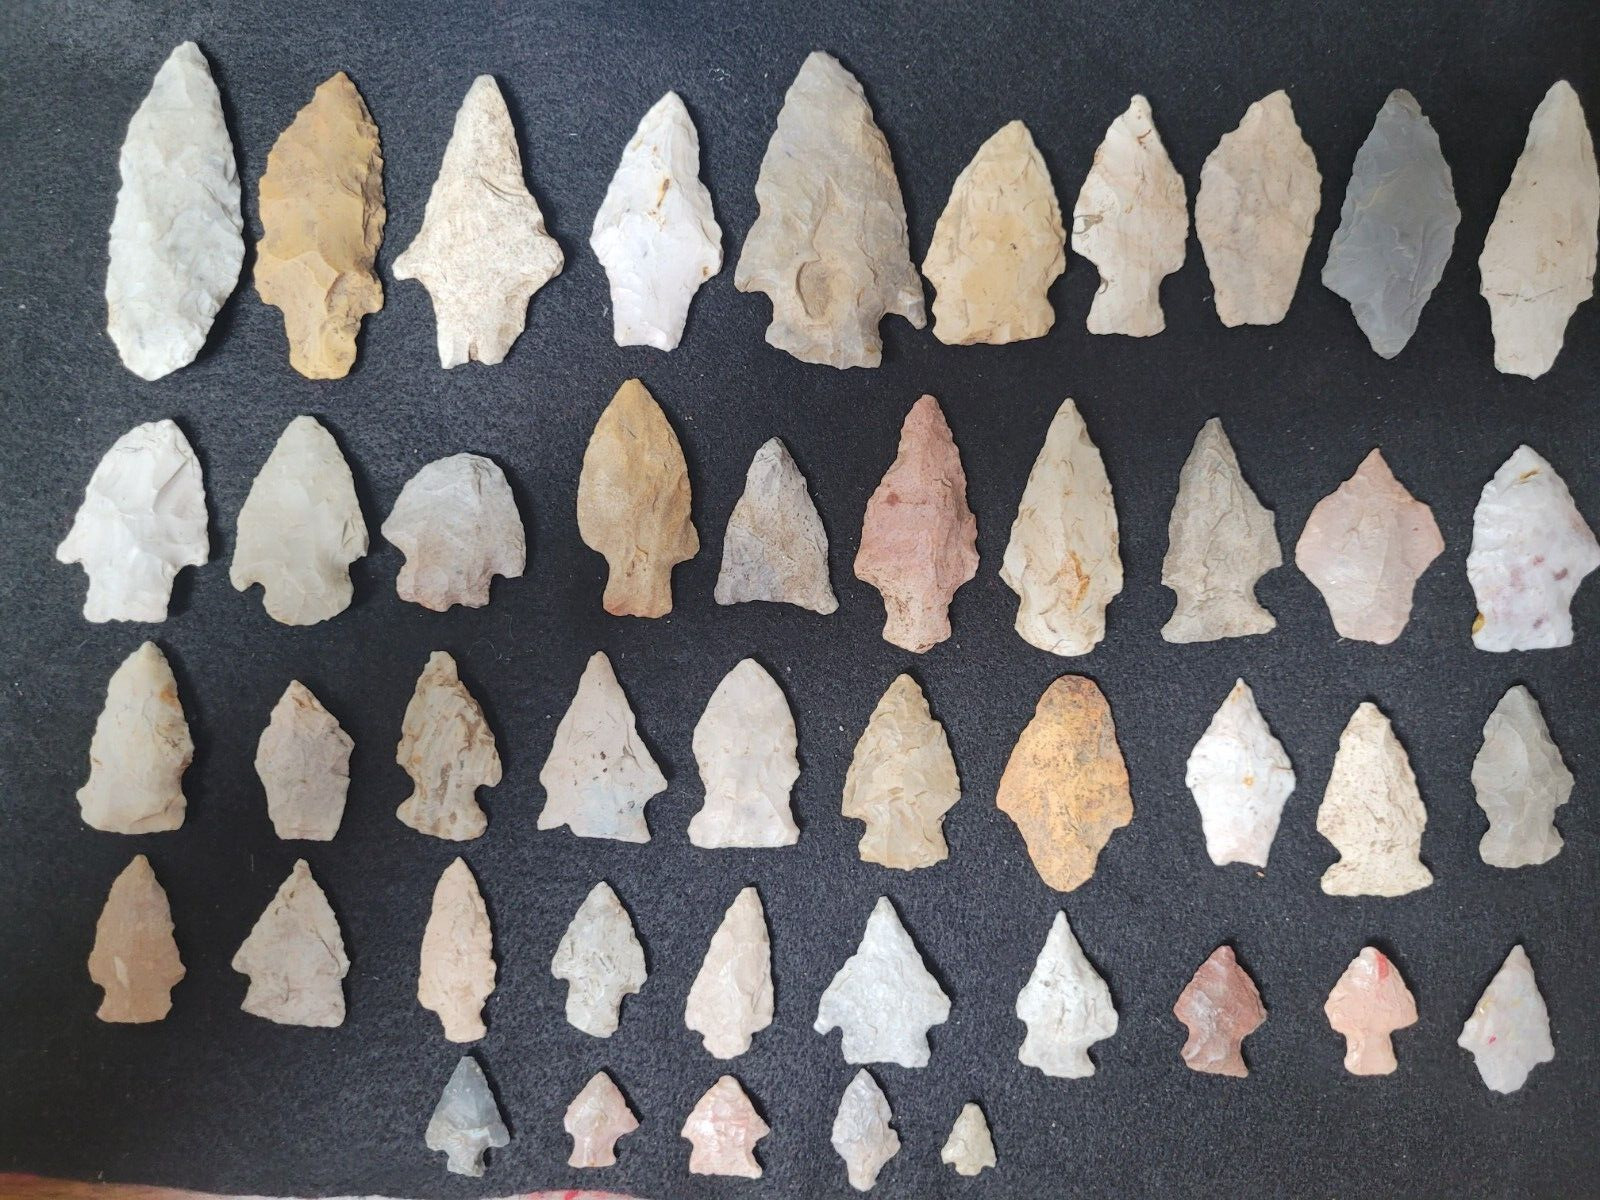 40 AUTHENTIC  ARROWHEADS FROM ILLINOIS AND MISSOURI   PRE 1600